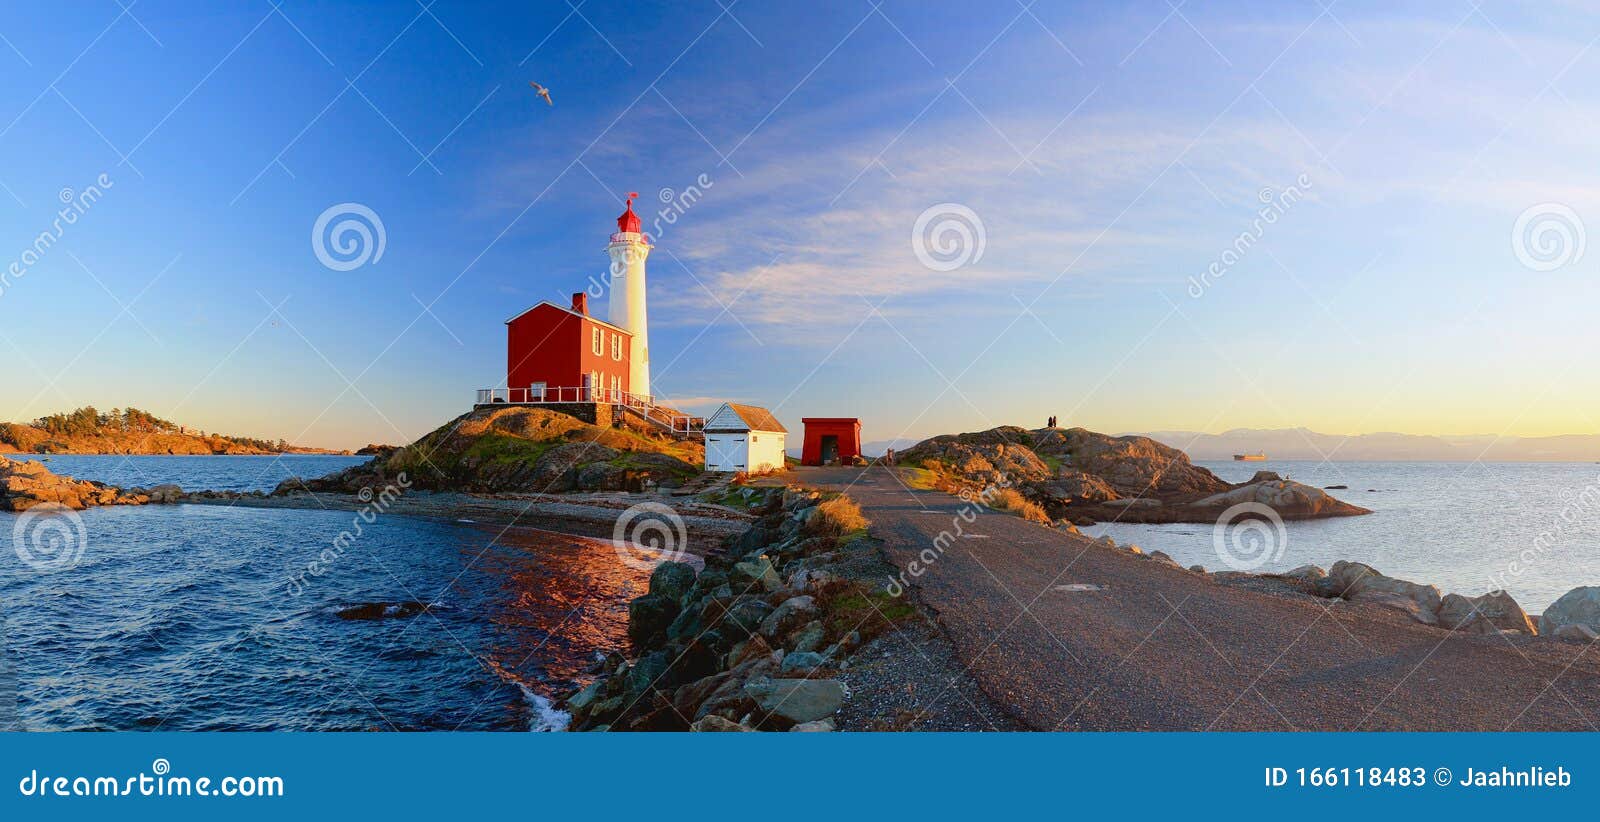 fisgard lighthouse at sunset, fort rodd hill national historic site, victoria, bc, vancouver island, canada